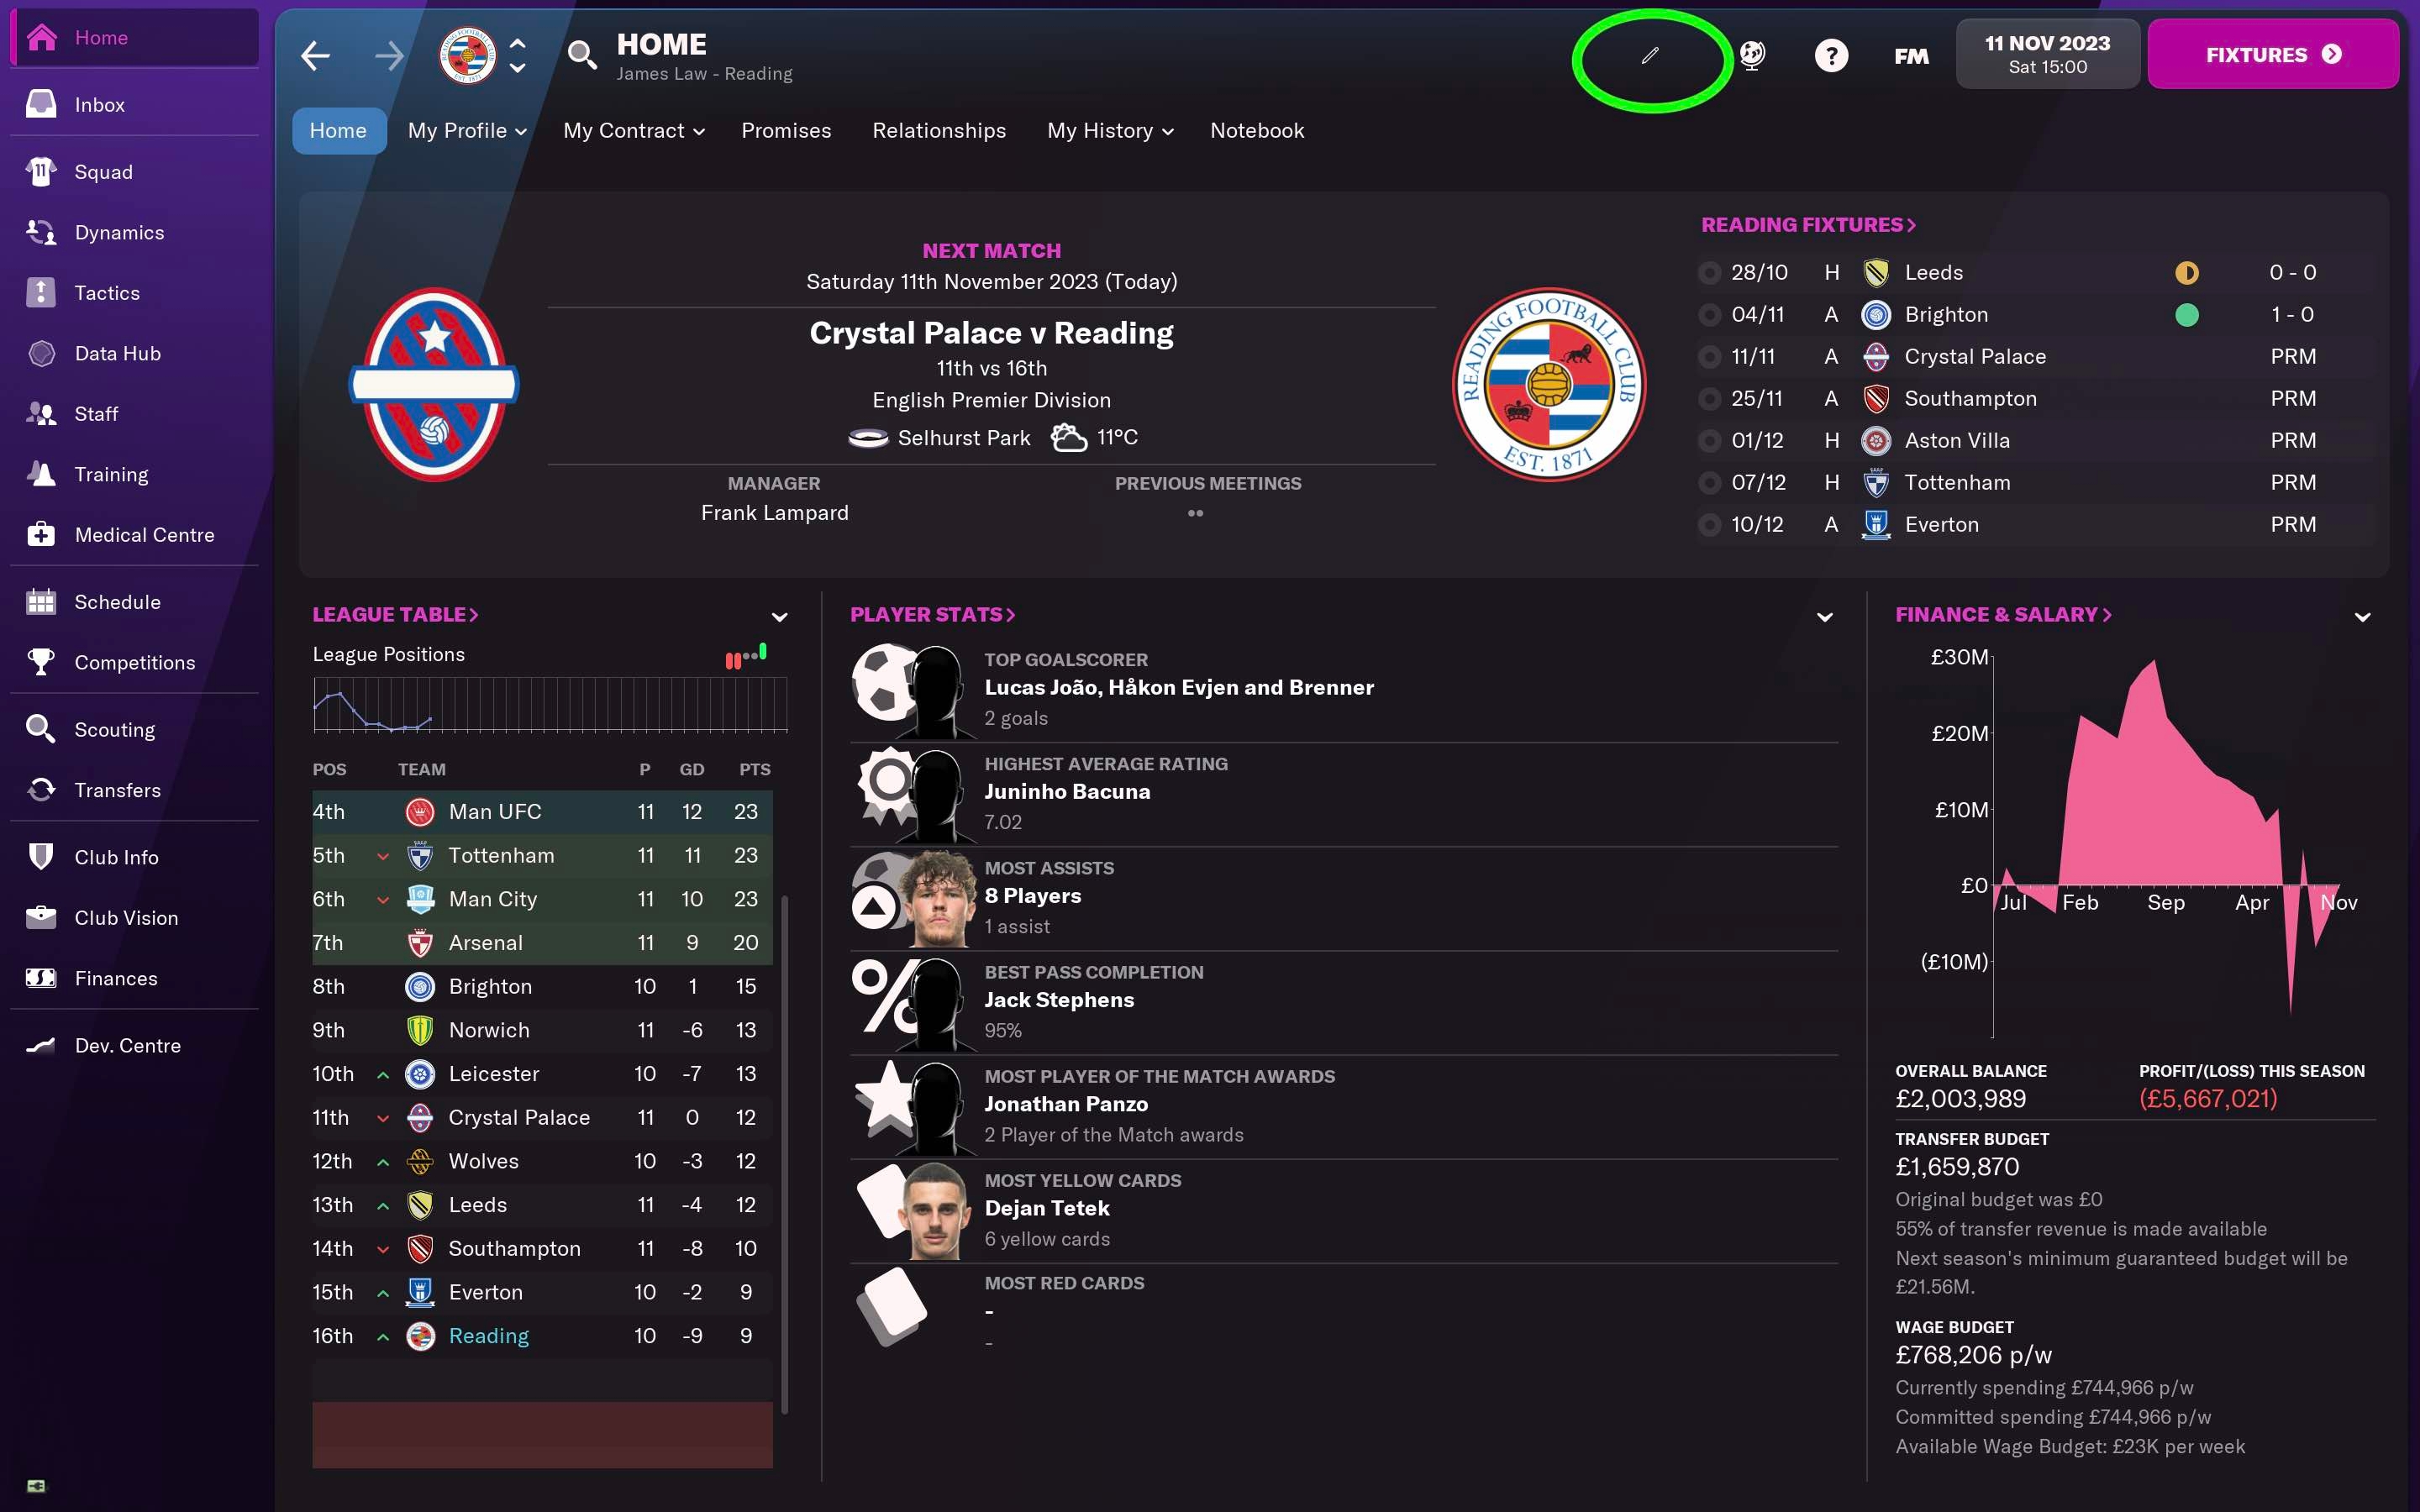 Football Manager 2022 Mobile - Transfers, FMM22